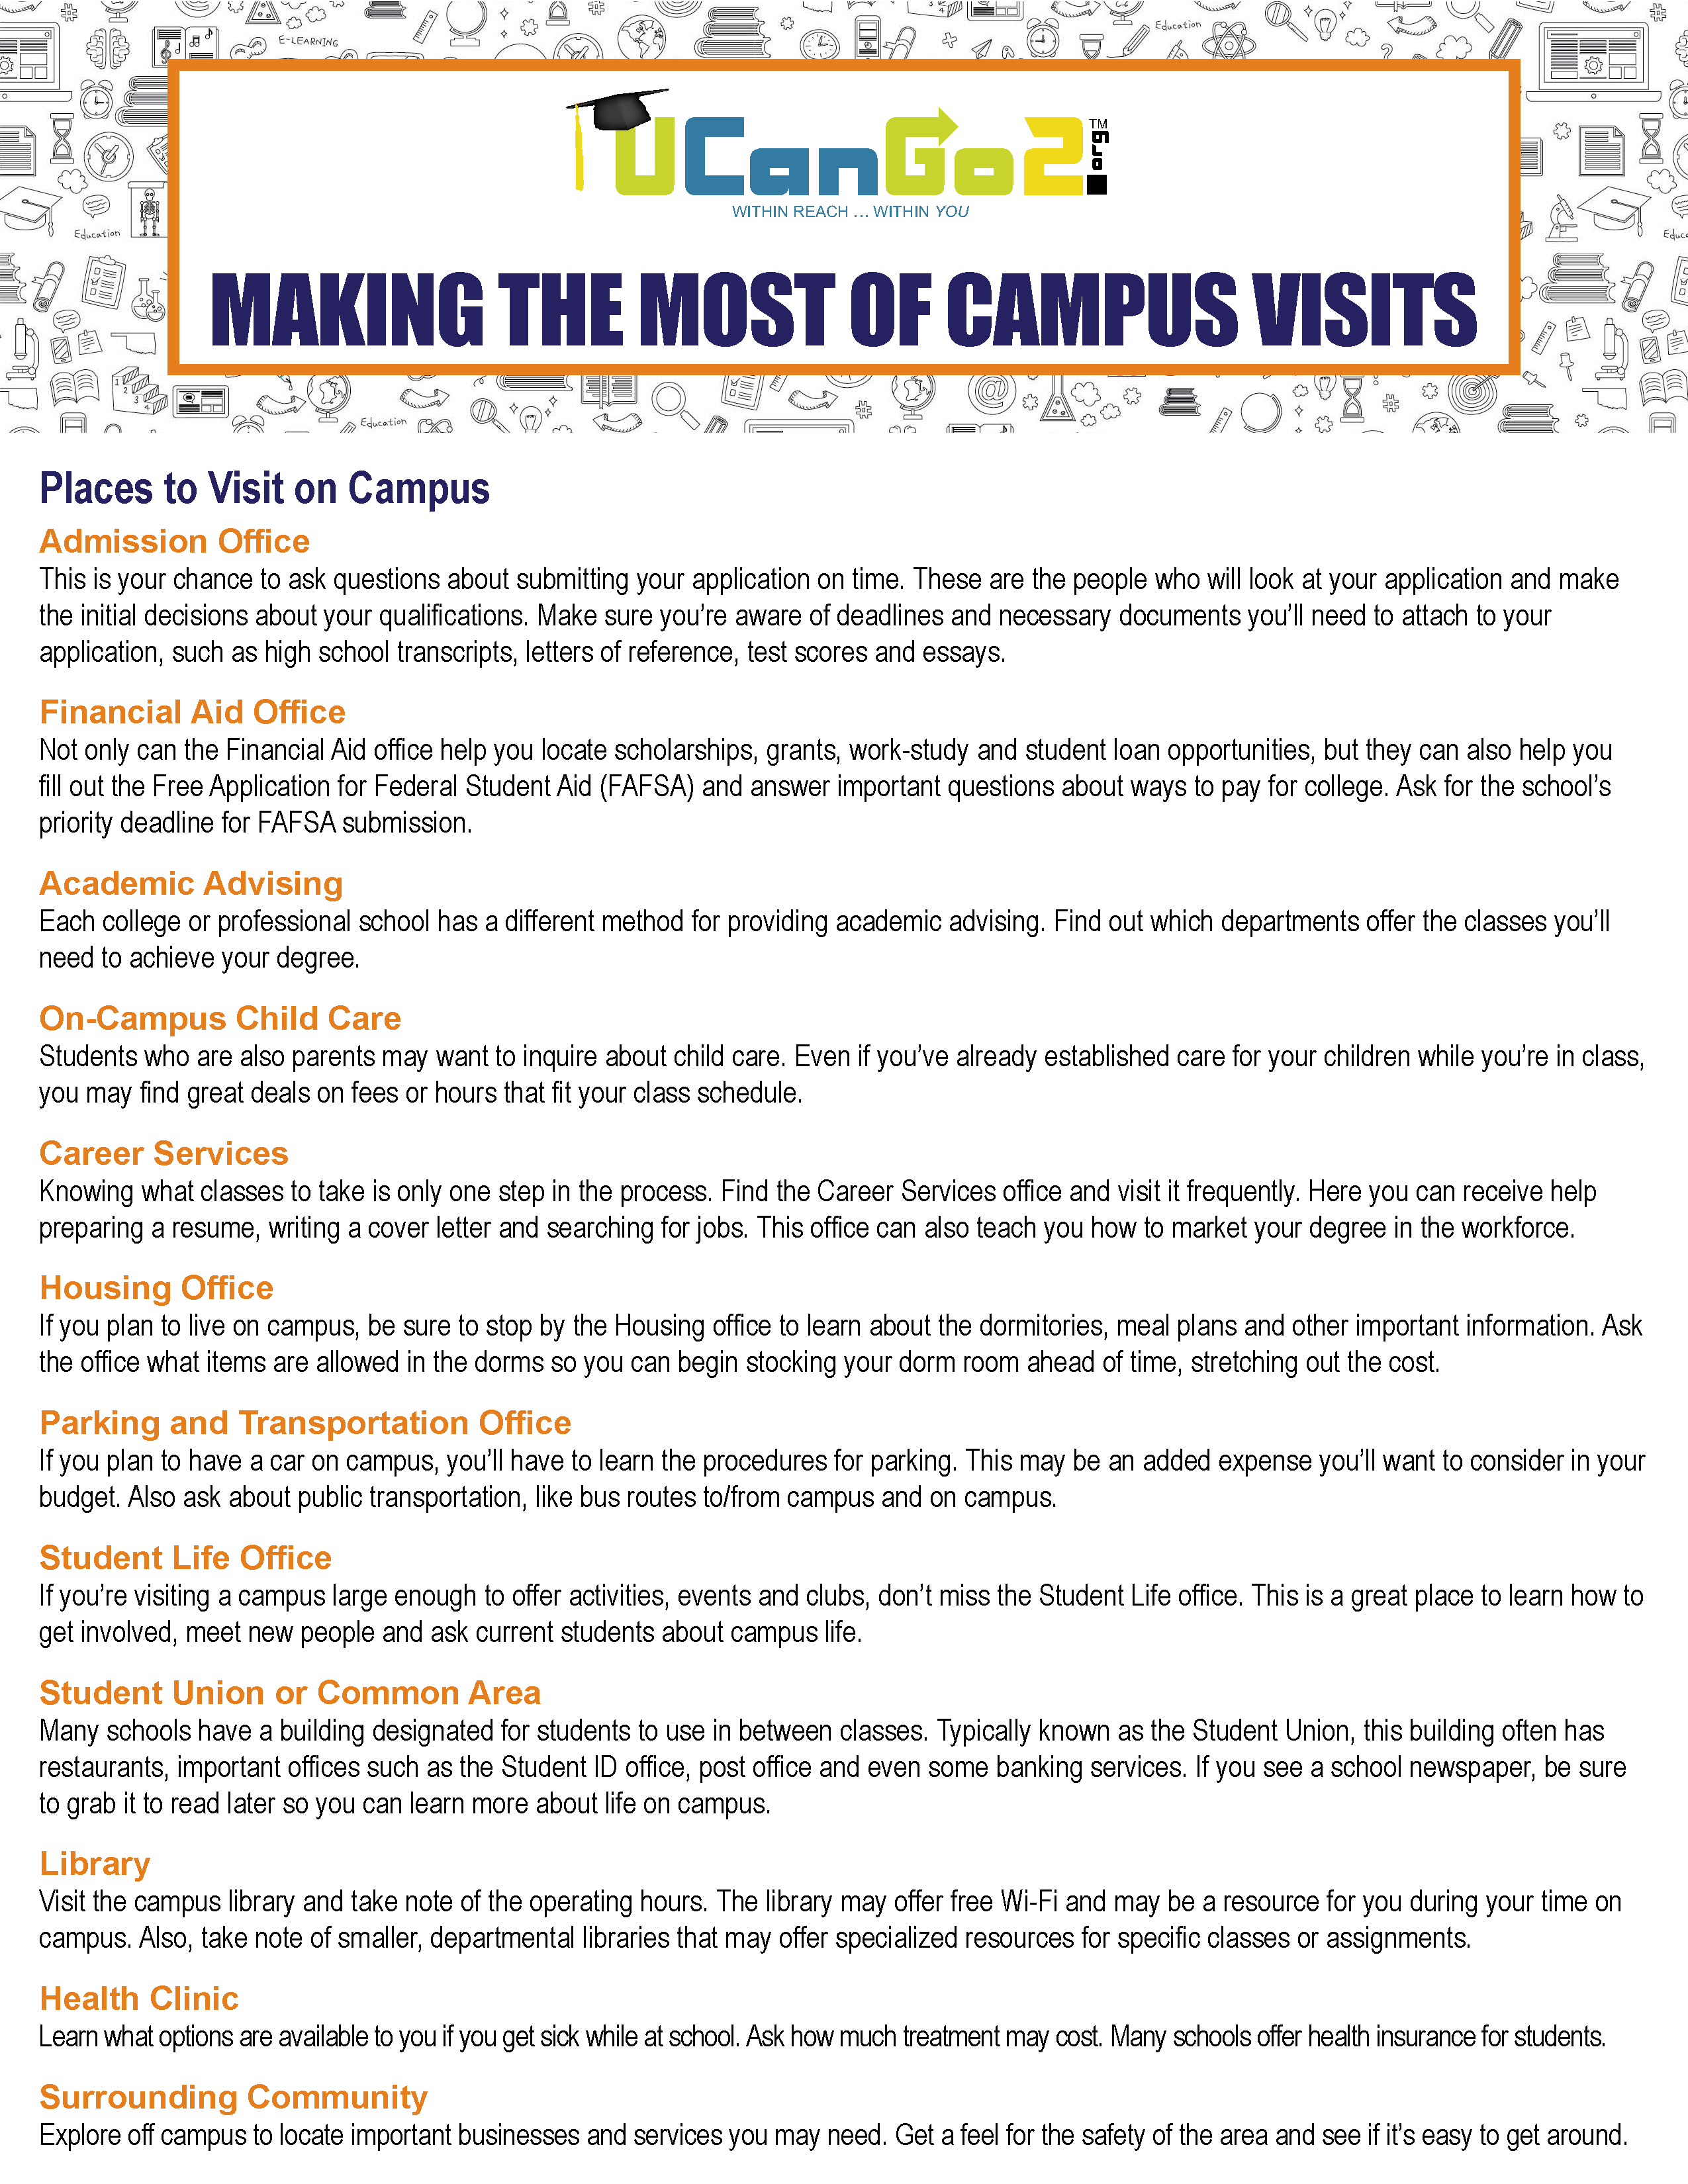 Making the Most of Campus Visits opens in a new tab